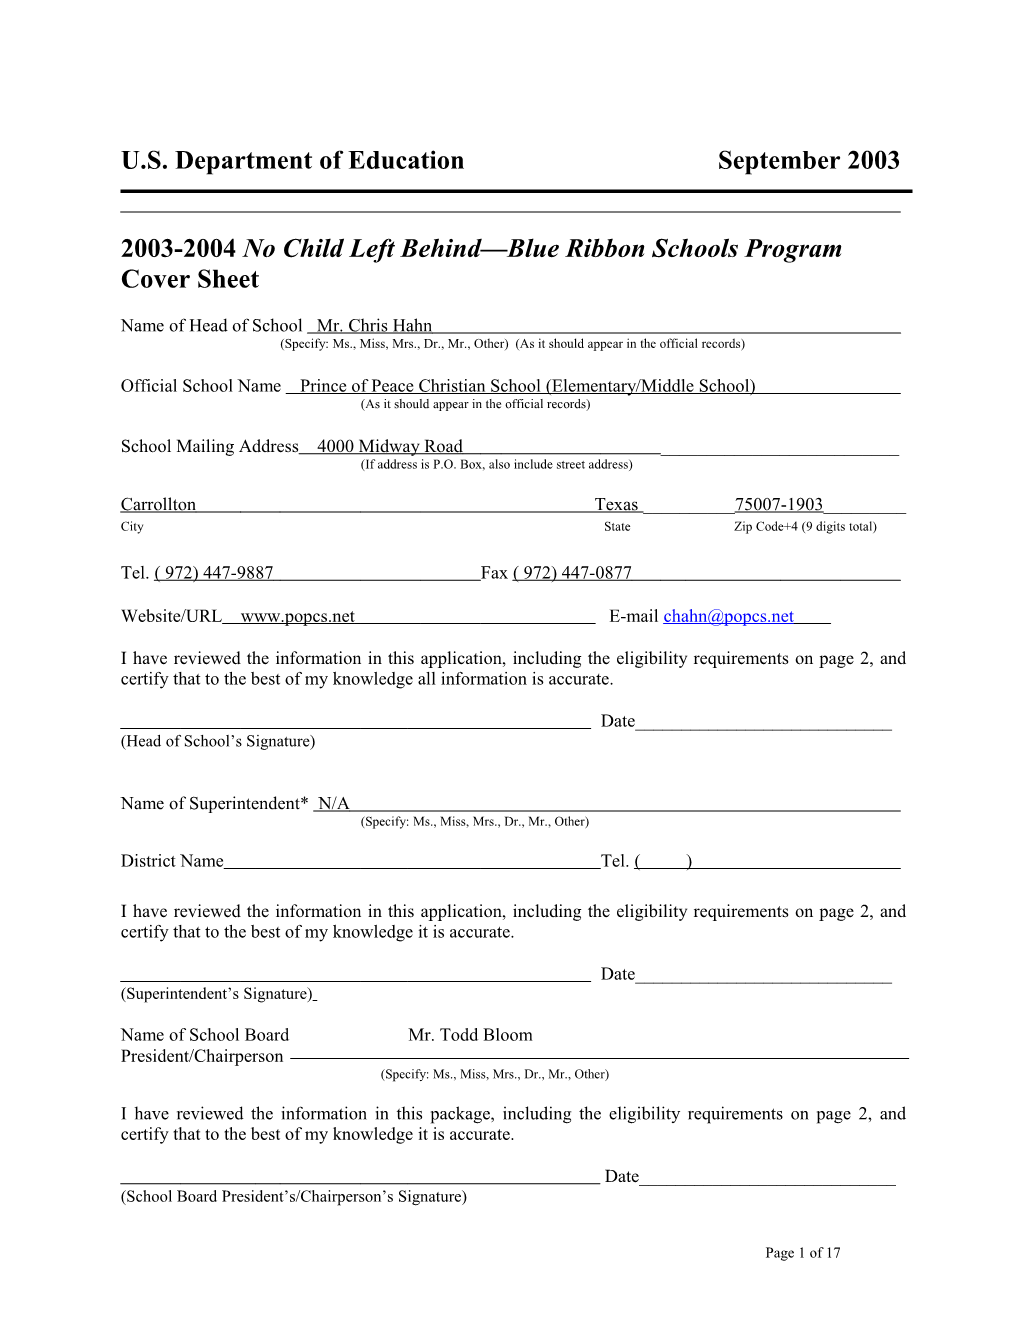 Prince of Peace Christian School 2004 No Child Left Behind-Blue Ribbon School Application